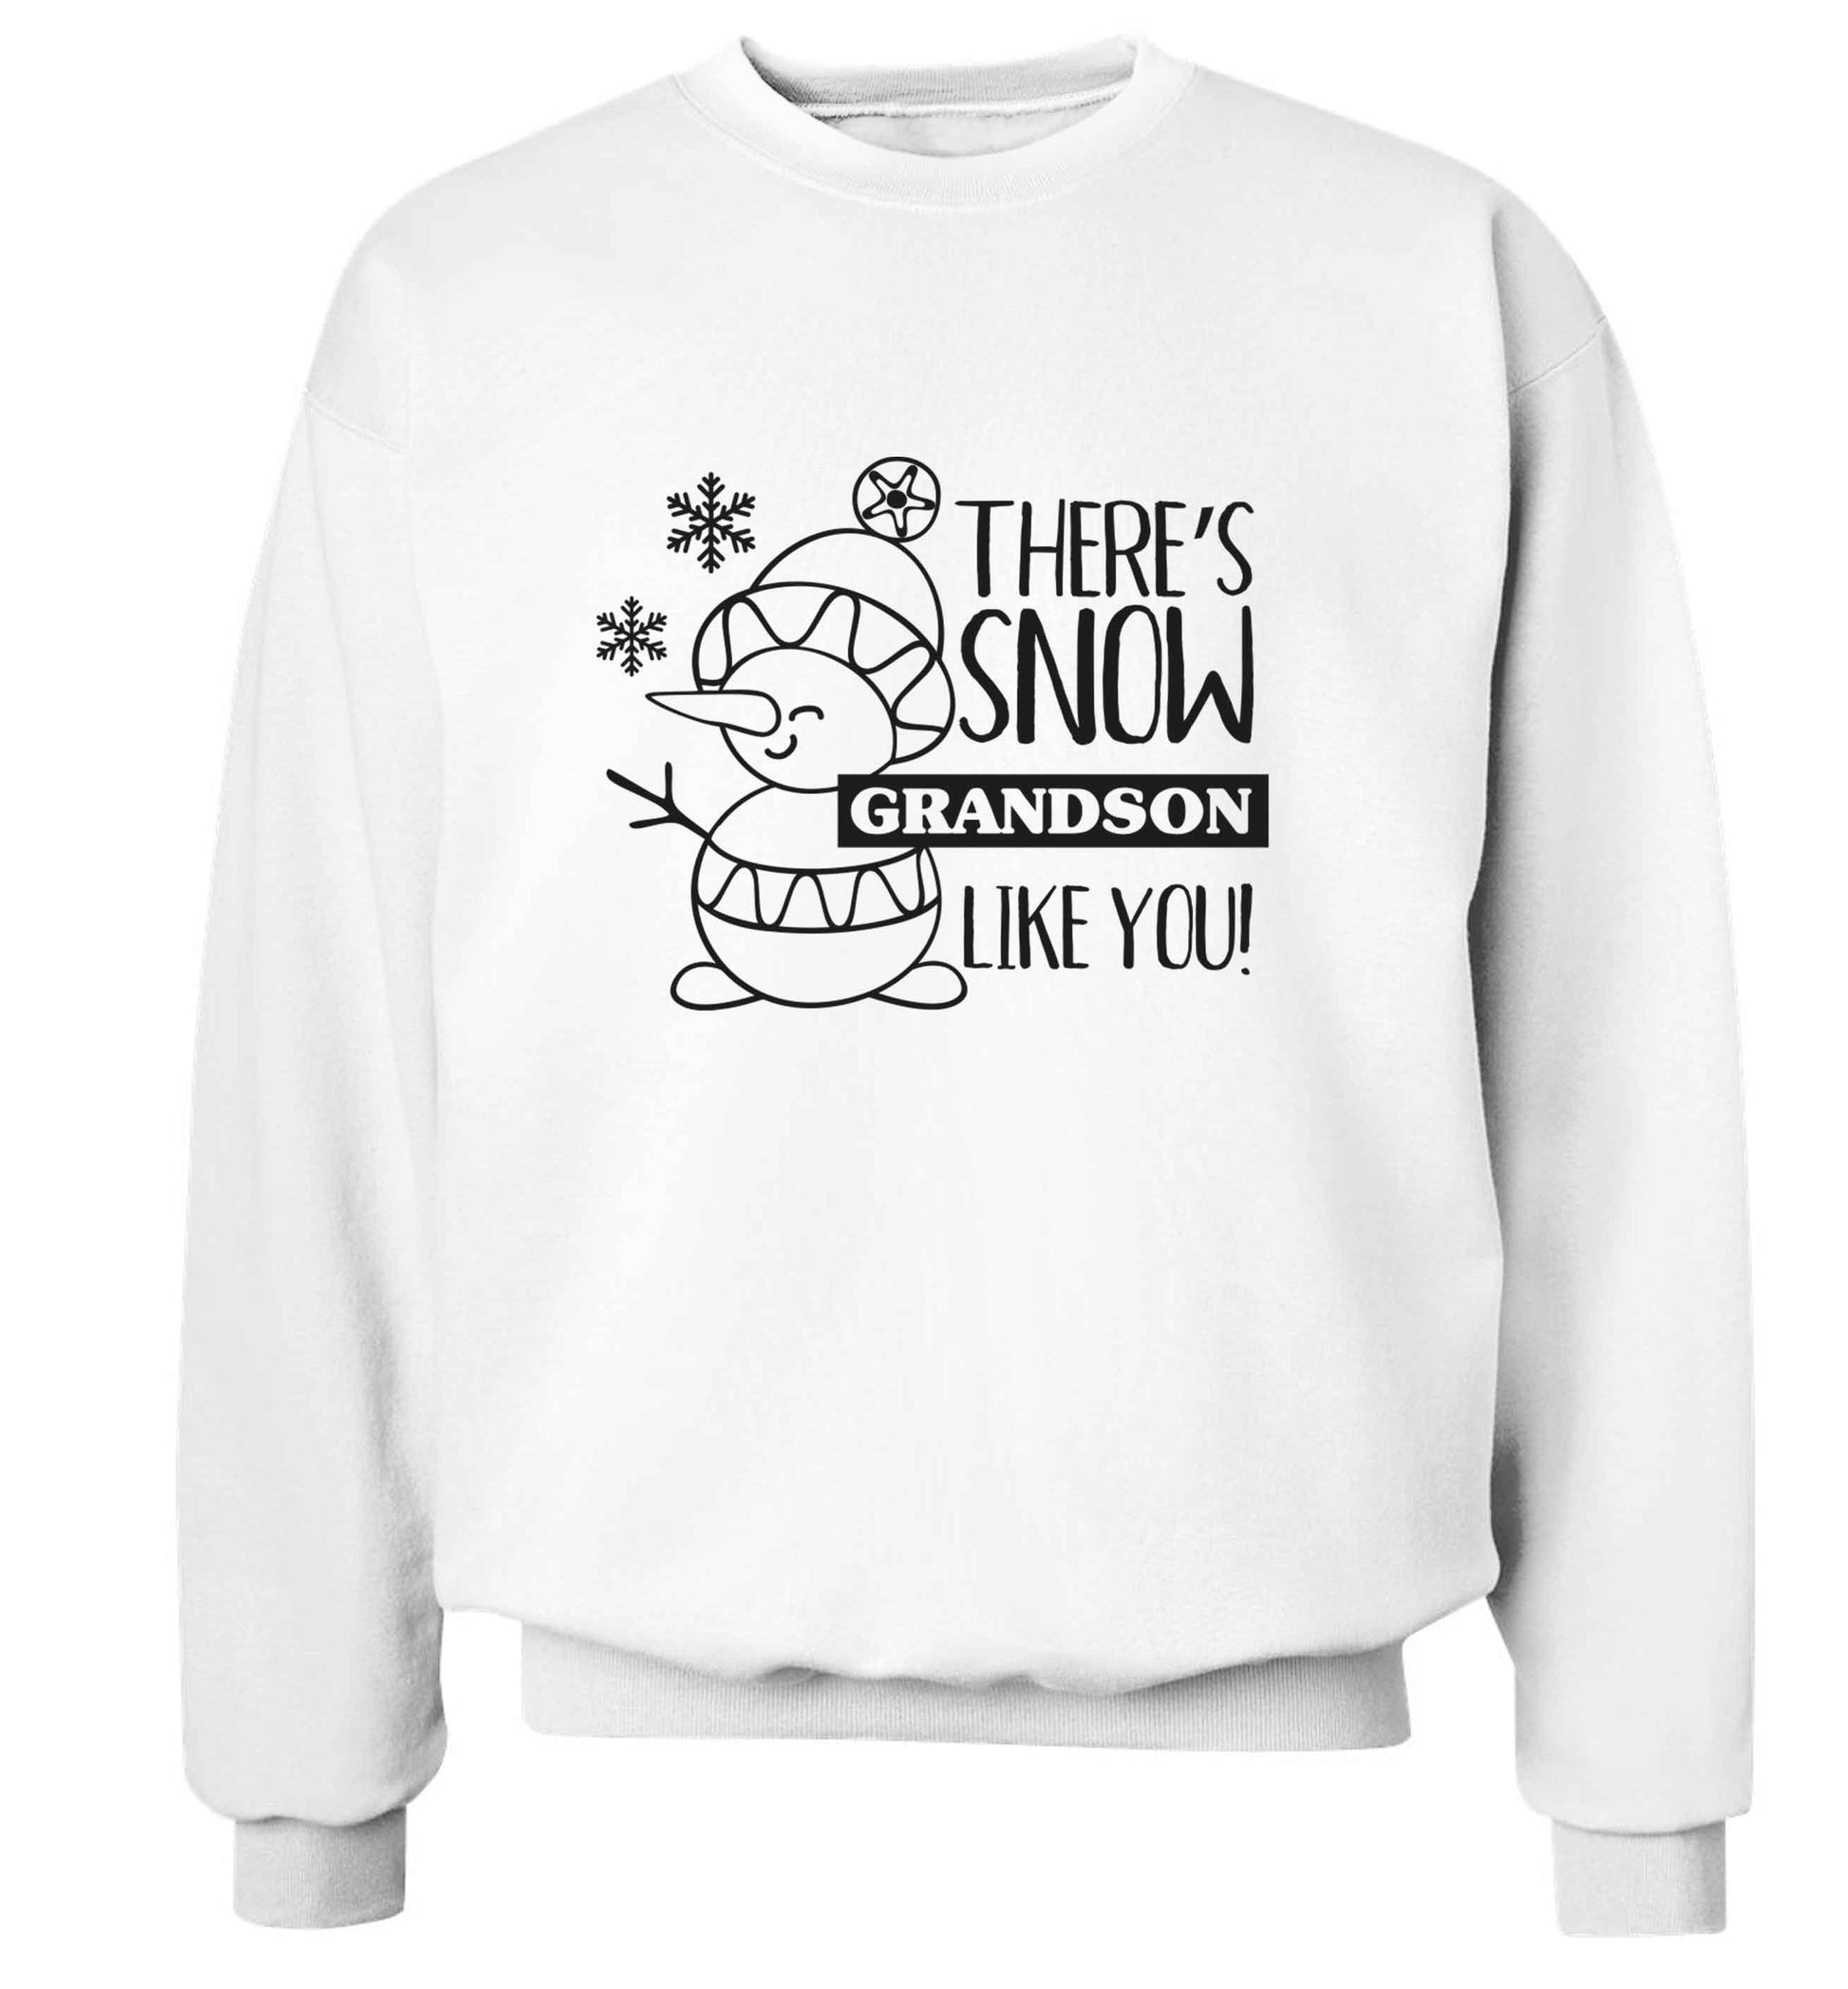 There's snow grandson like you adult's unisex white sweater 2XL